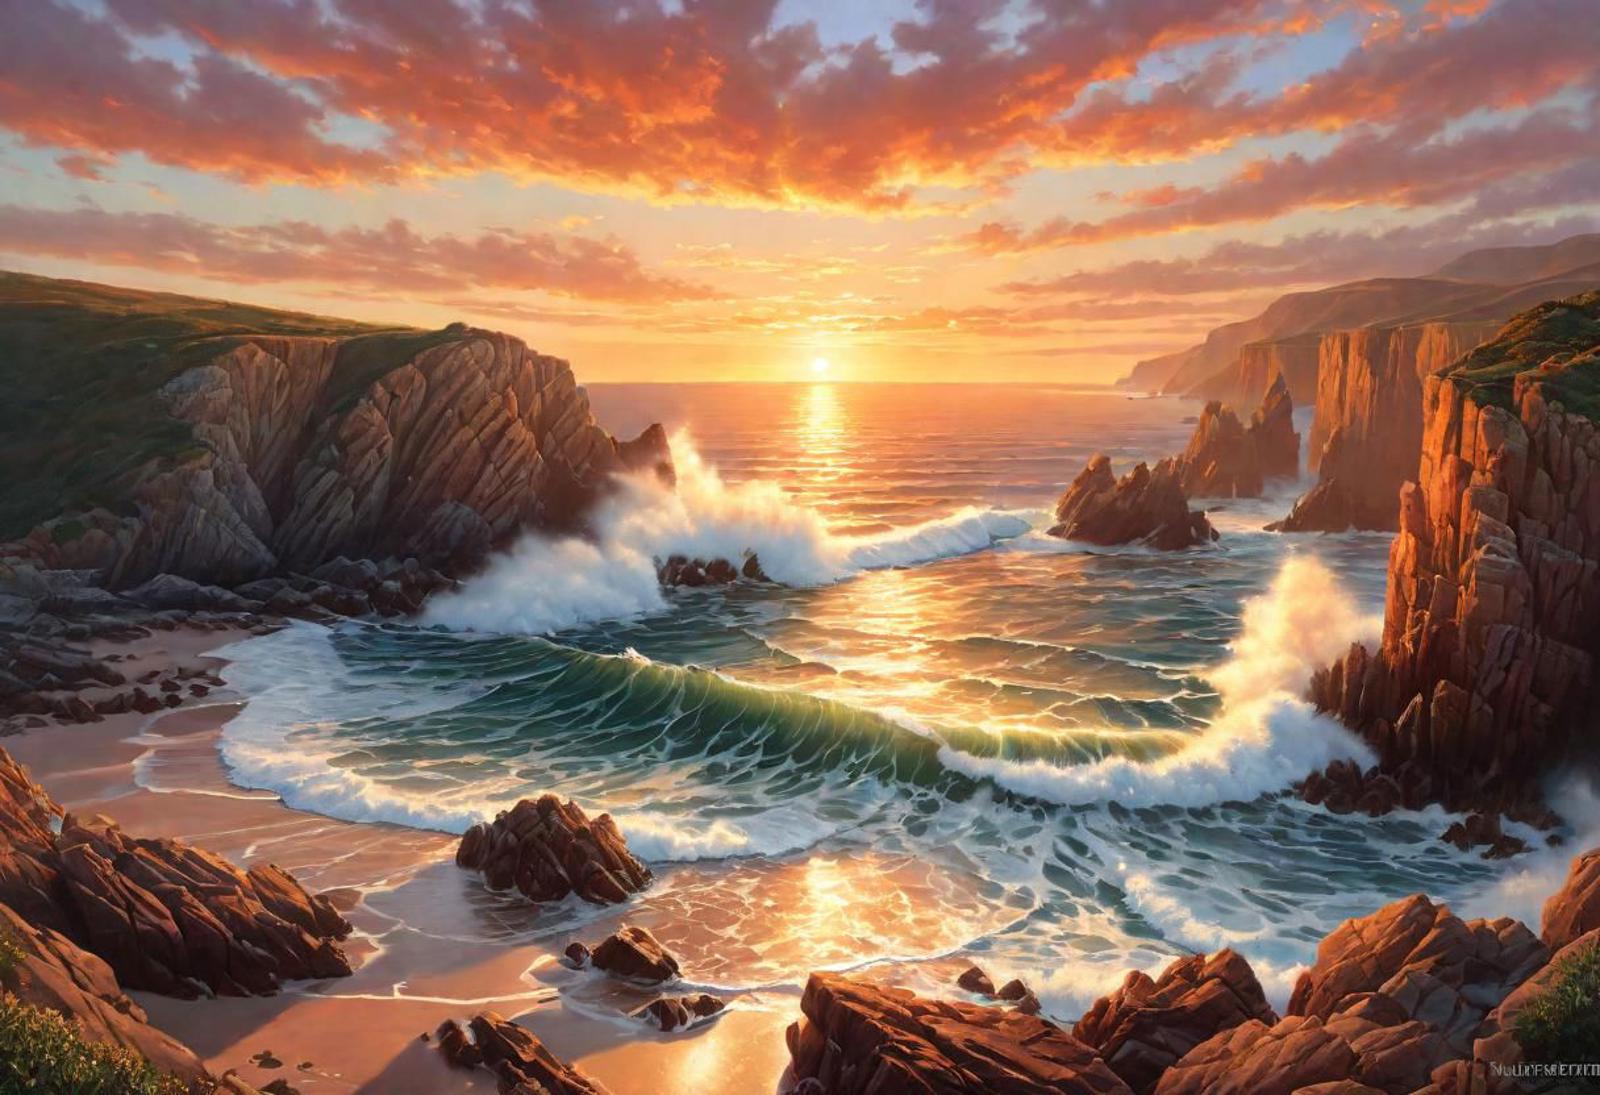 A beautiful watercolor painting of a sunset over the ocean with rocky cliffs in the foreground.